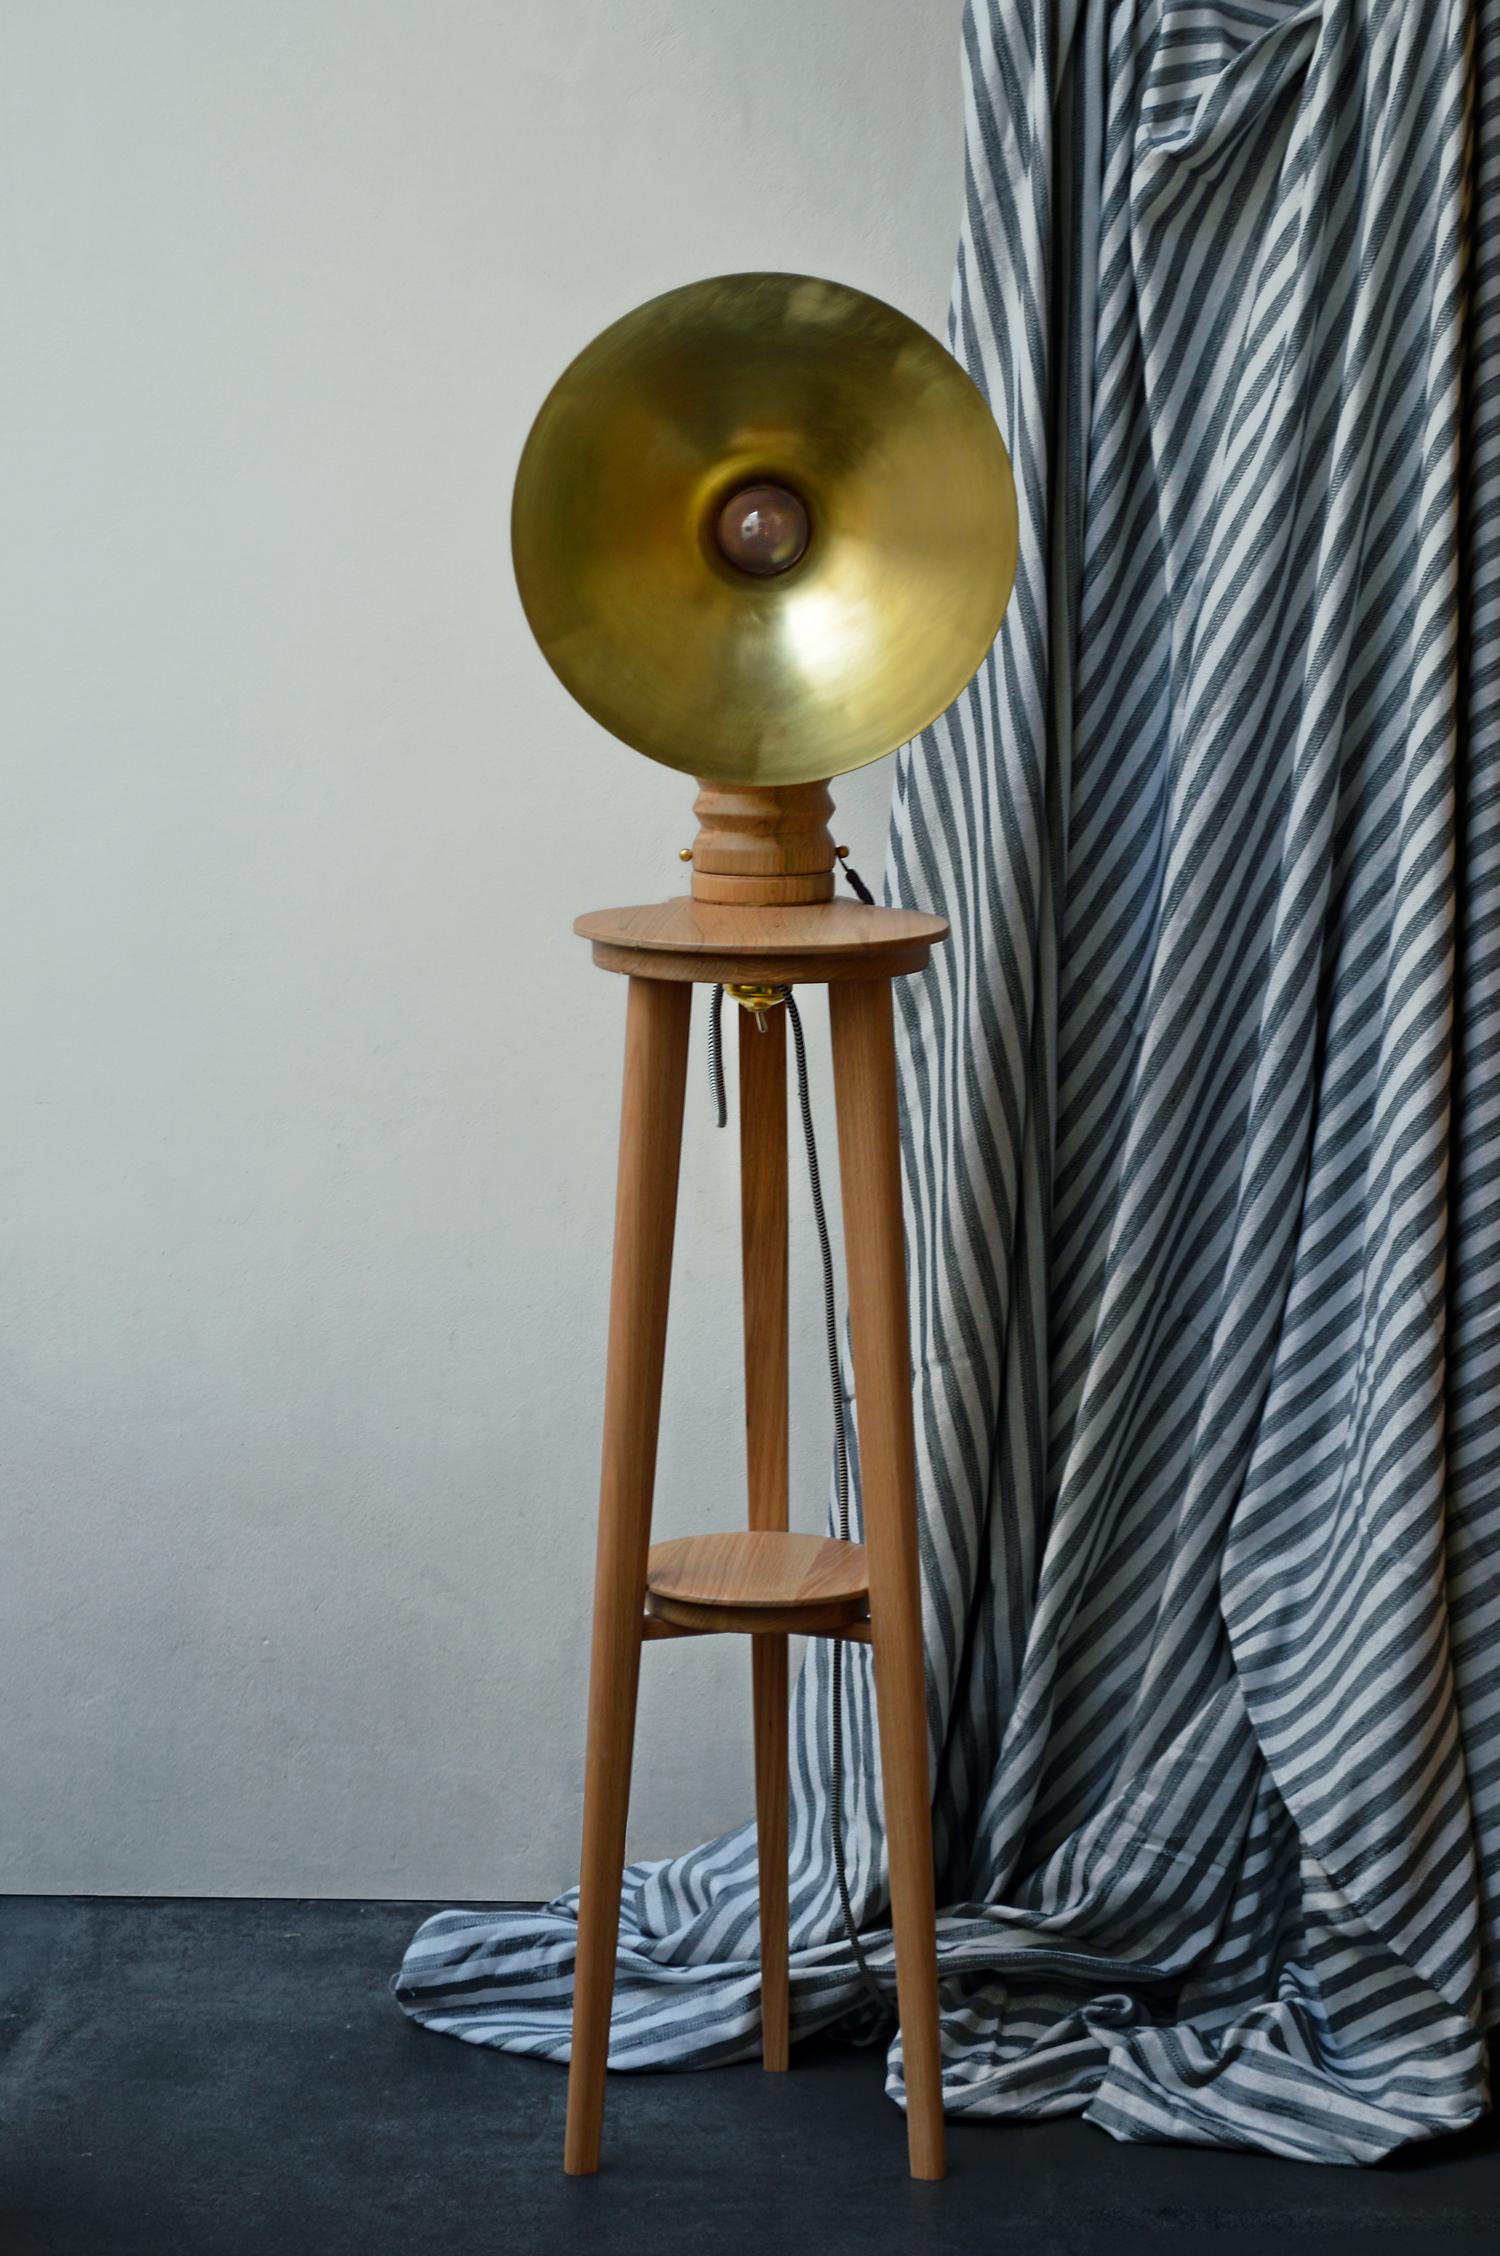 Sousaphone draws inspiration from the gleaming gramophones of the early 20th century and reinterprets them to illuminate spaces. Its brass or copper screen creates unique and soft reflections. Where social gatherings were once enlivened by the